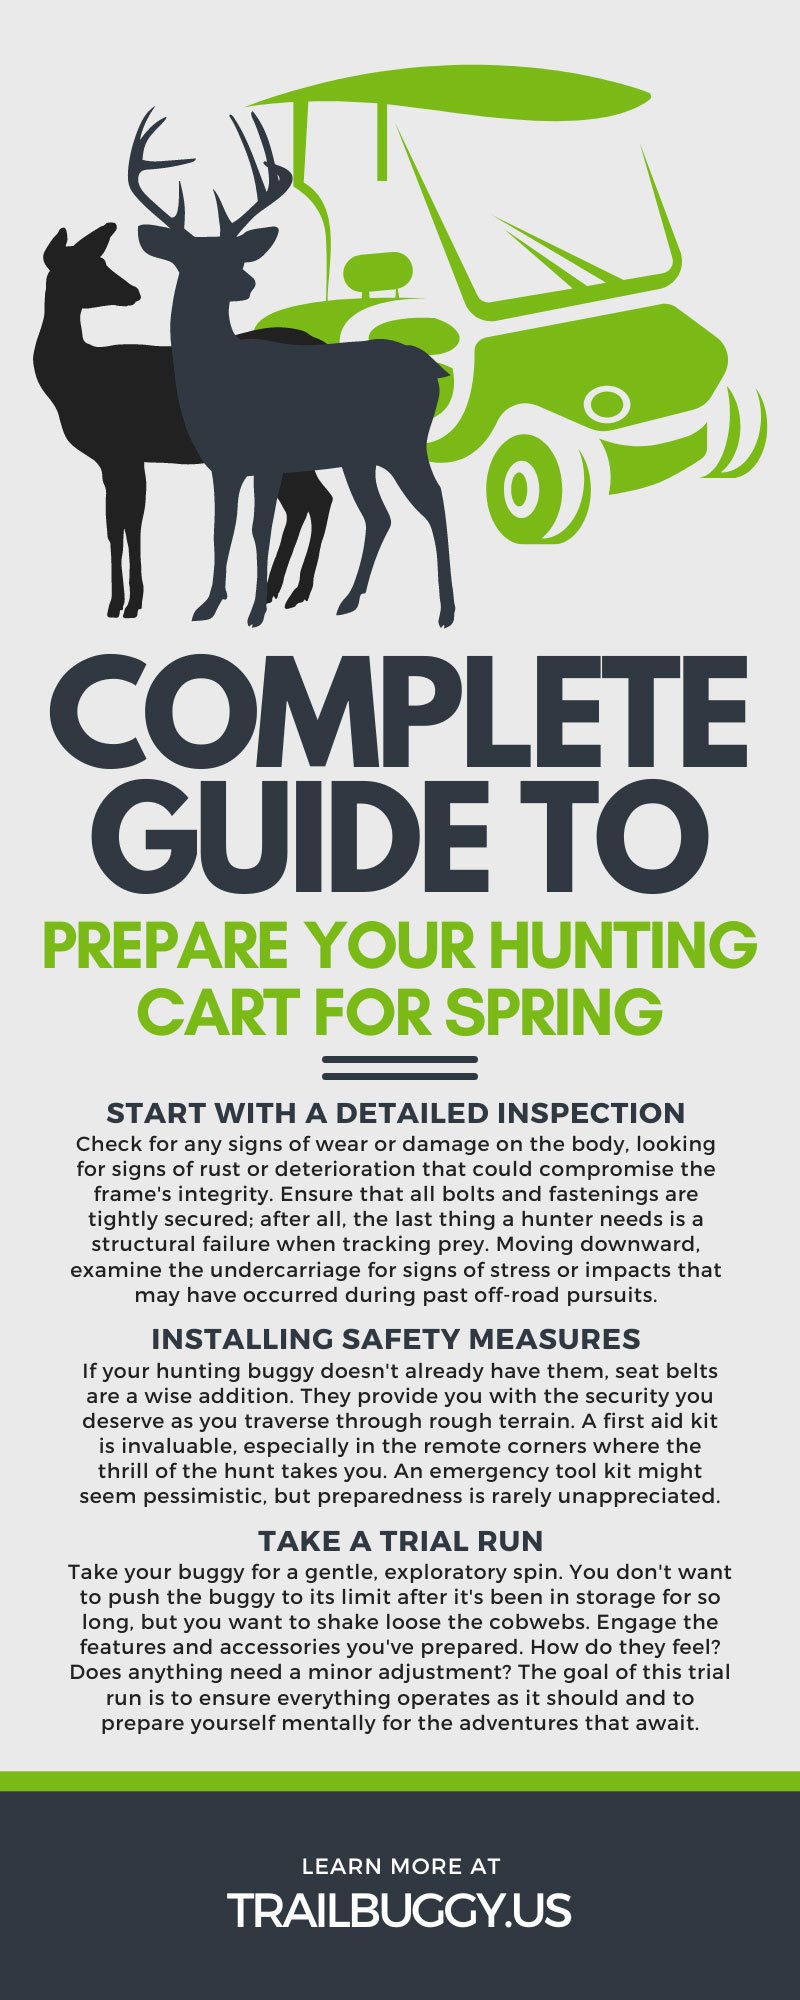 Complete Guide To Prepare Your Hunting Cart for Spring